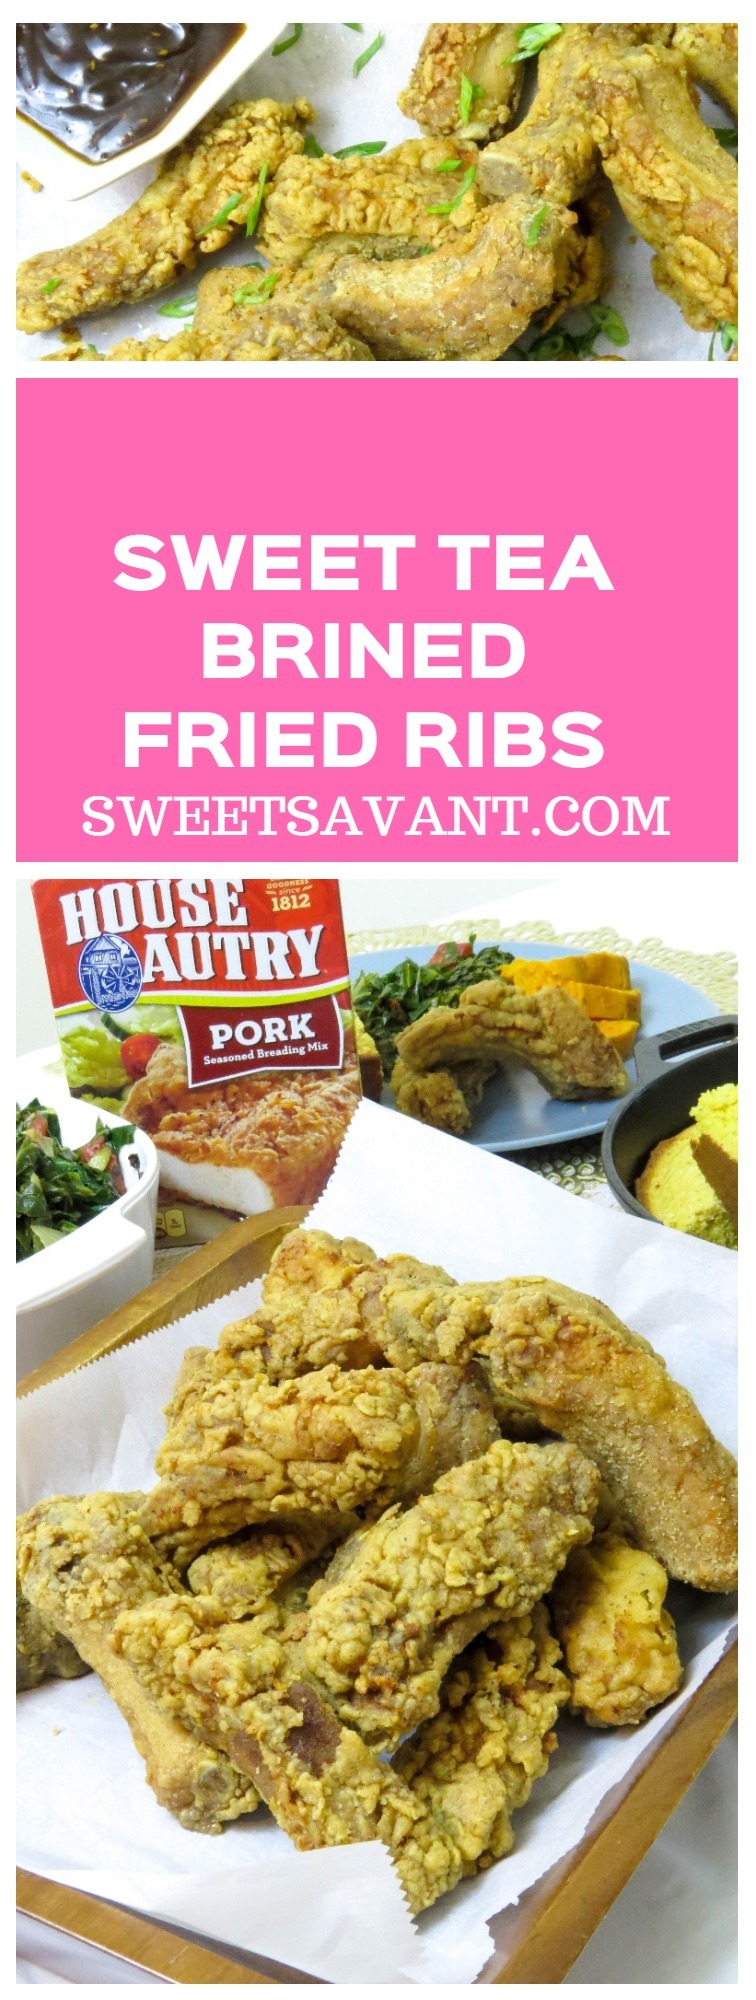 house autry sweet tea brined fried baby back ribs 